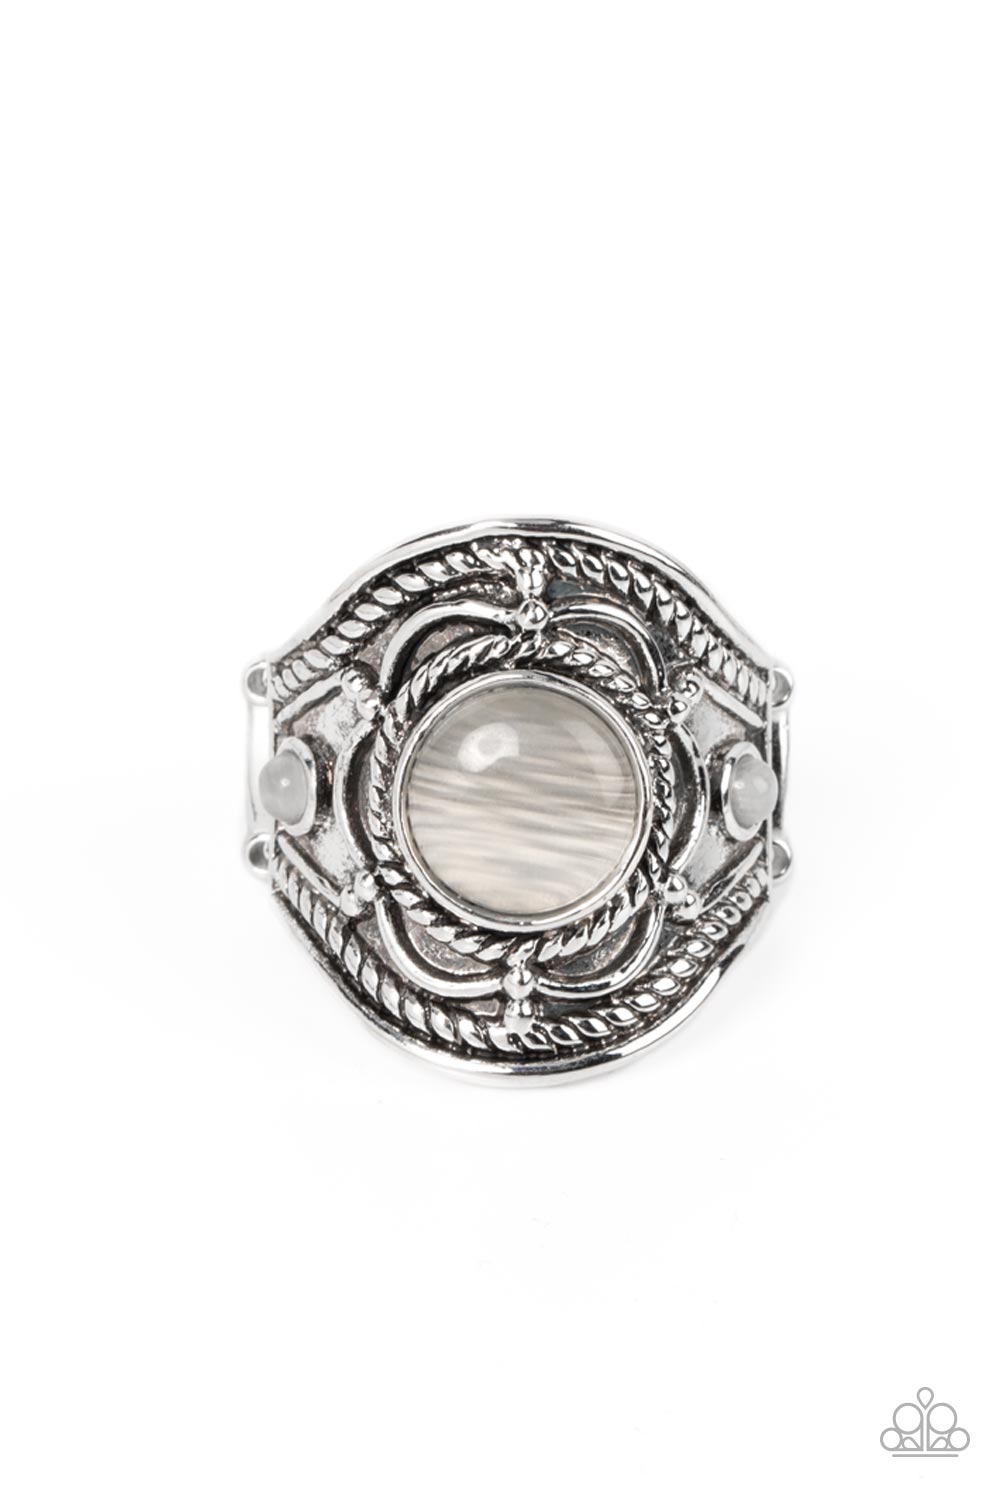 Exuberant Escapade White Ring - Paparazzi Accessories  A textured floral motif blooms around a round white cat's eye center that is flanked by two dainty white cat's eye stones, resulting in a whimsically textured centerpiece atop the finger. Features a stretchy band for a flexible fit.  Sold as one individual ring.